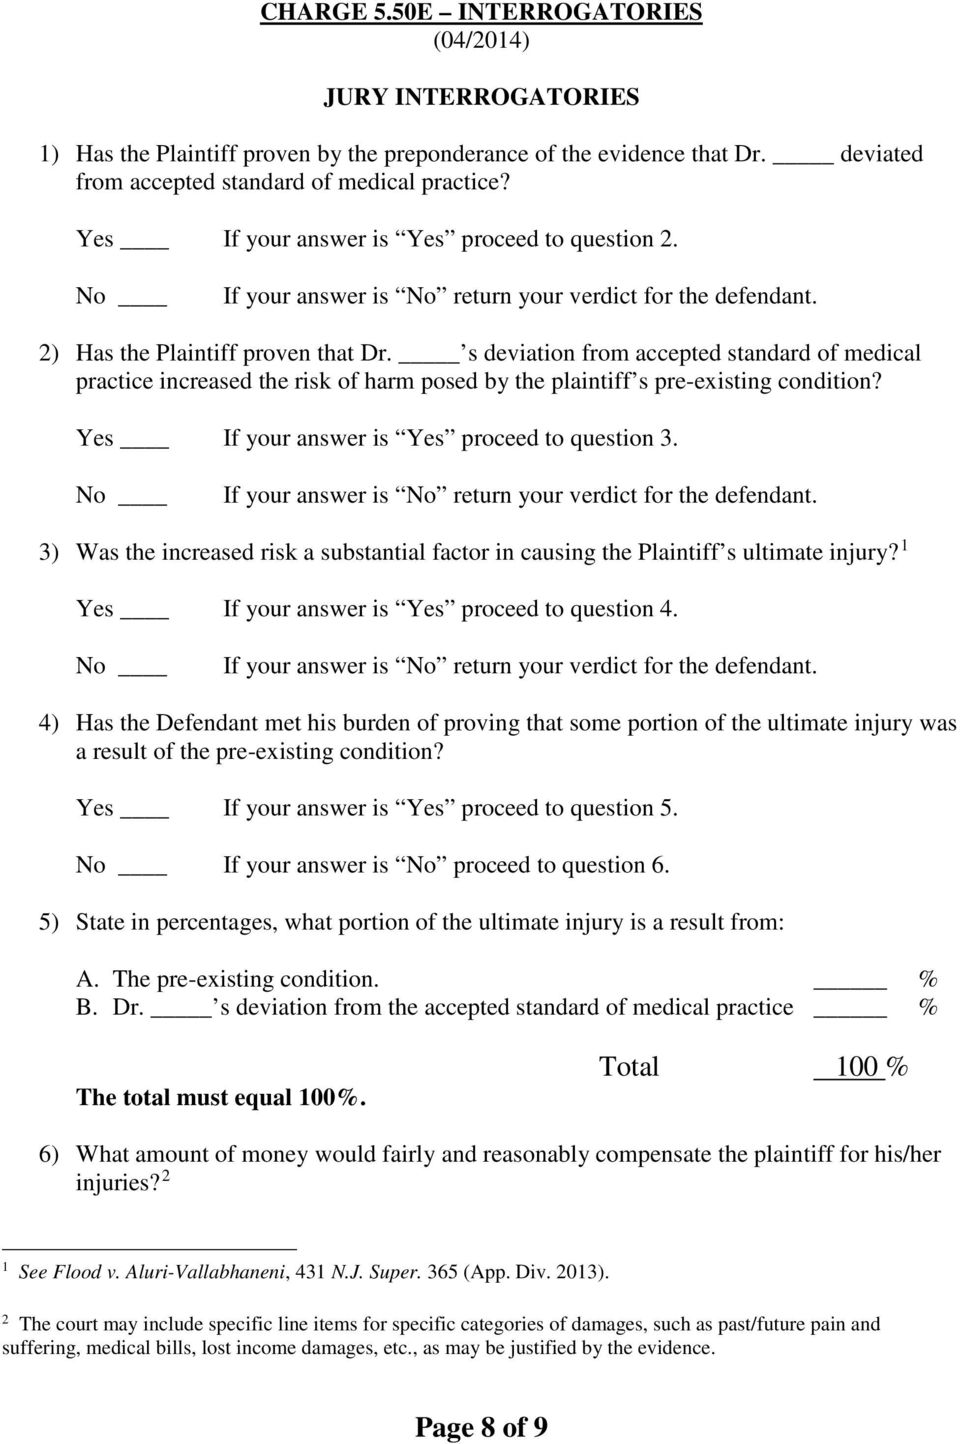 s deviation from accepted standard of medical practice increased the risk of harm posed by the plaintiff s pre-existing condition? Yes If your answer is Yes proceed to question 3.